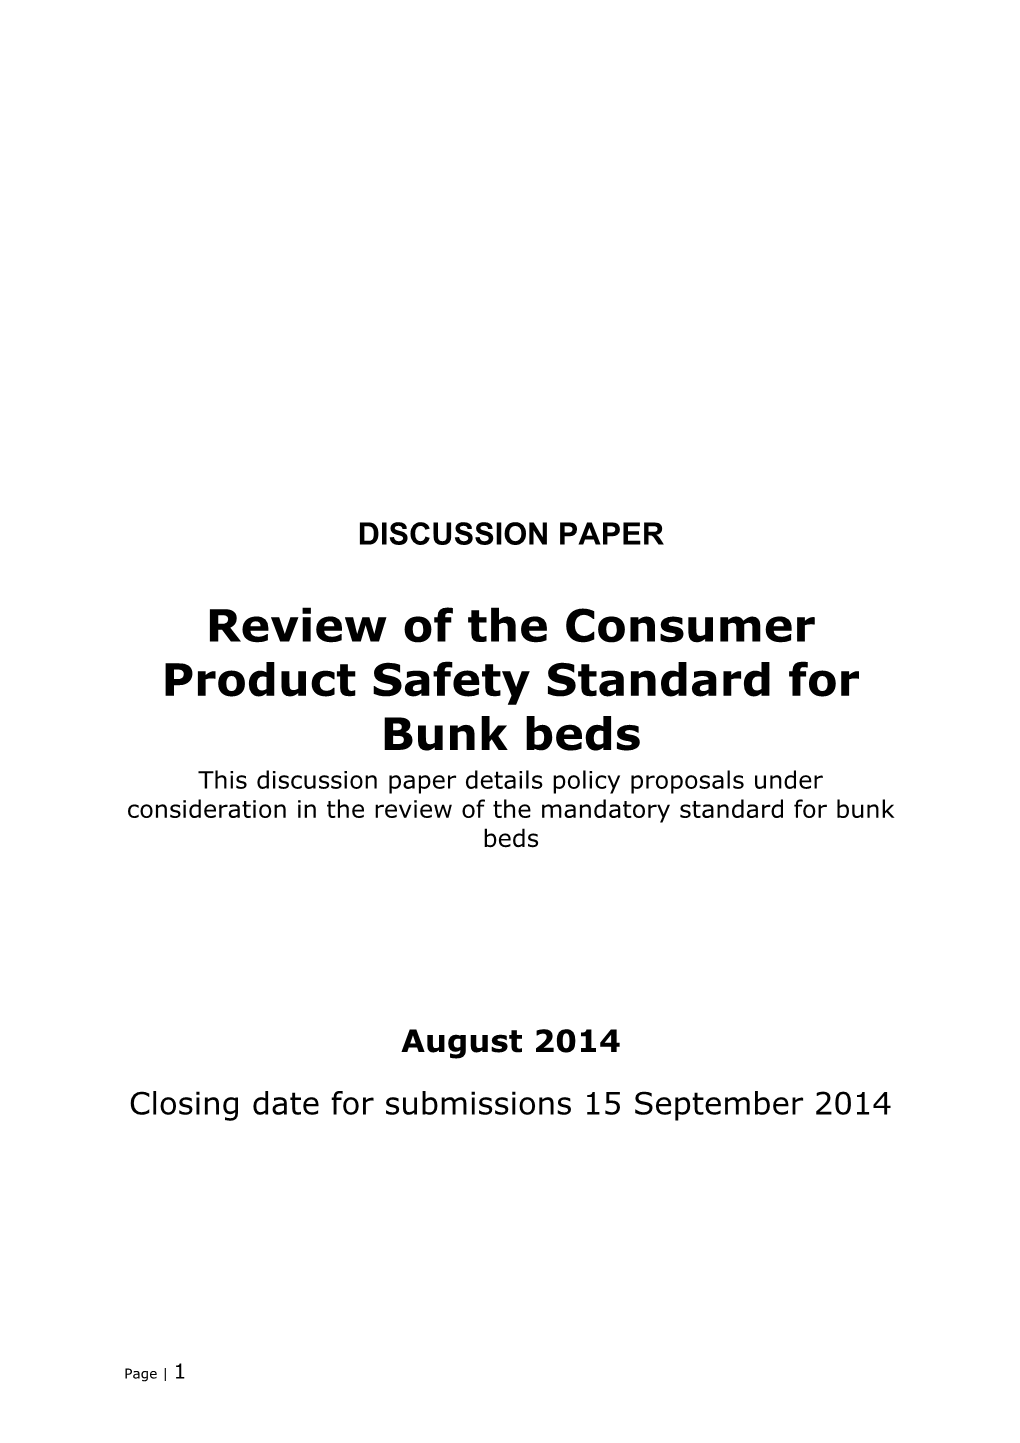 Review of the Consumer Product Safety Standard for Bunk Beds